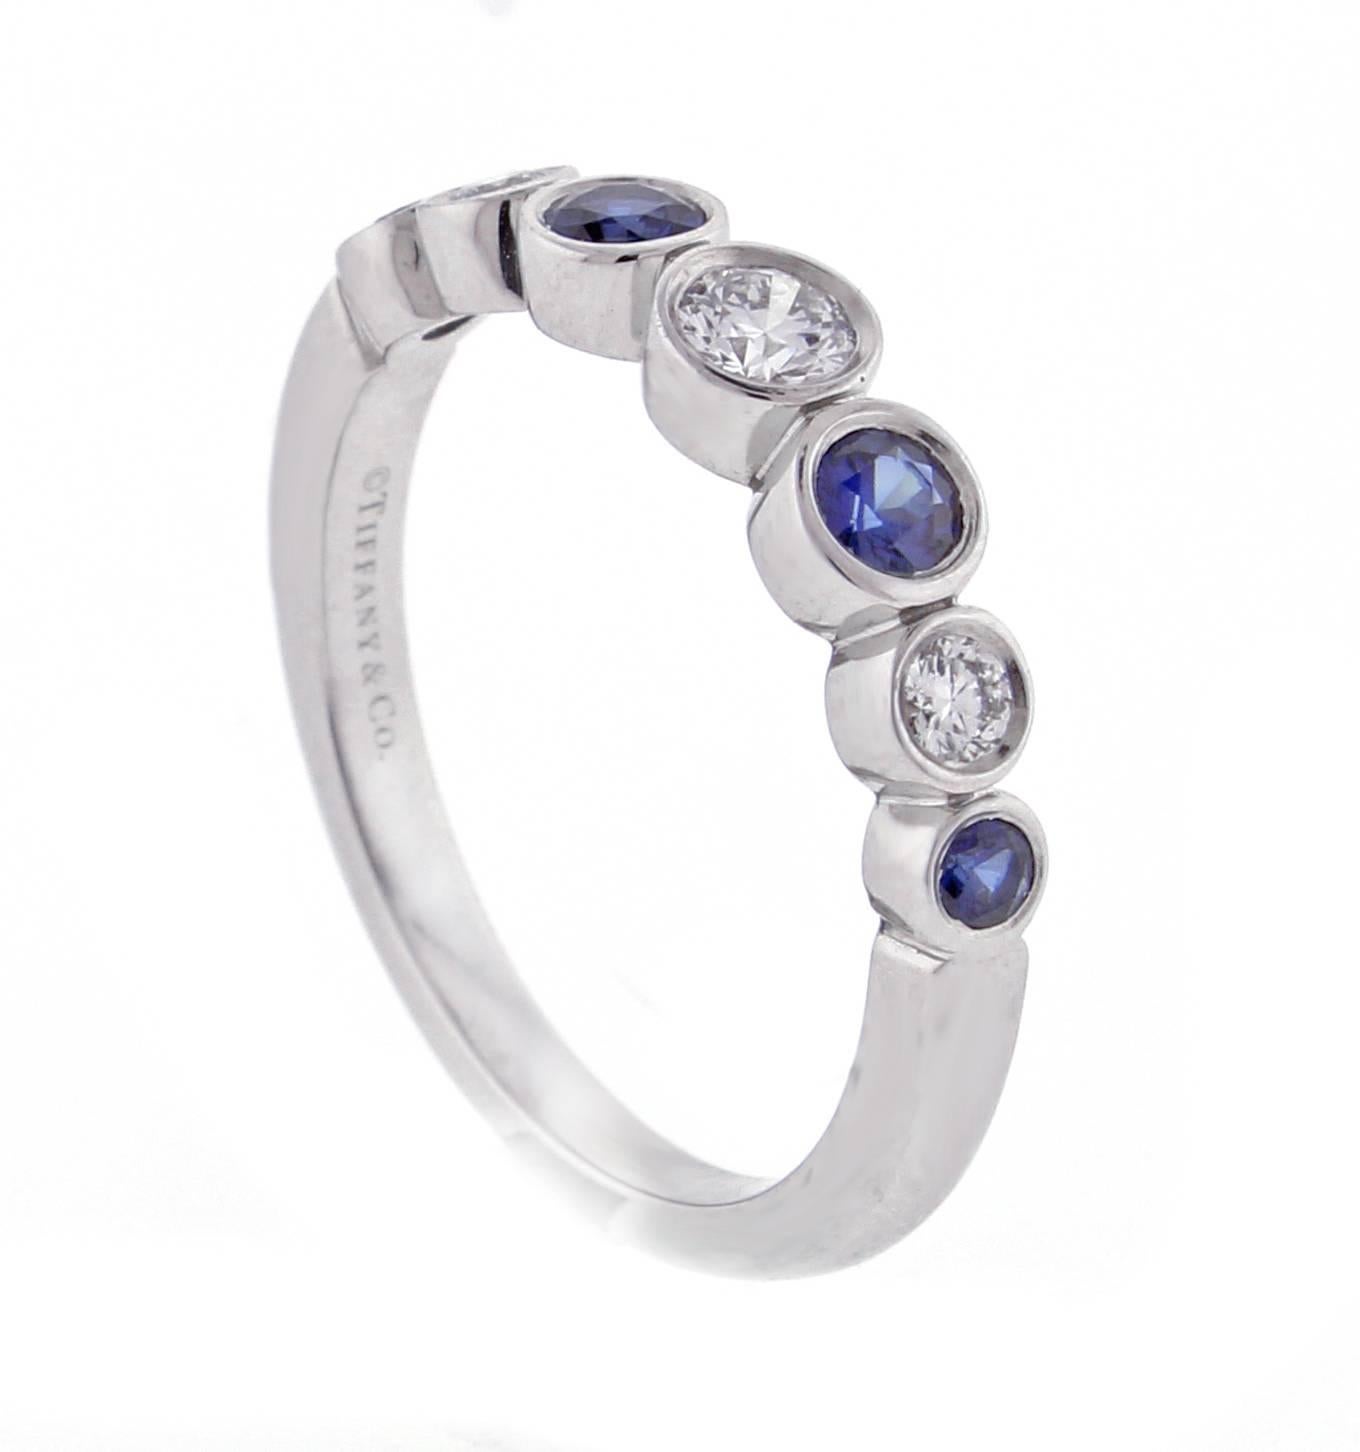 From Tiffany and Co.'s Jazz  collection, a sapphire and diamond Jazz ring. The  platinum ring consists of three brilliant diamonds weighing  approximately .35 carats and 4 rich blue sapphires weighing .40 carats, size 5.5, adjustable. This is a new